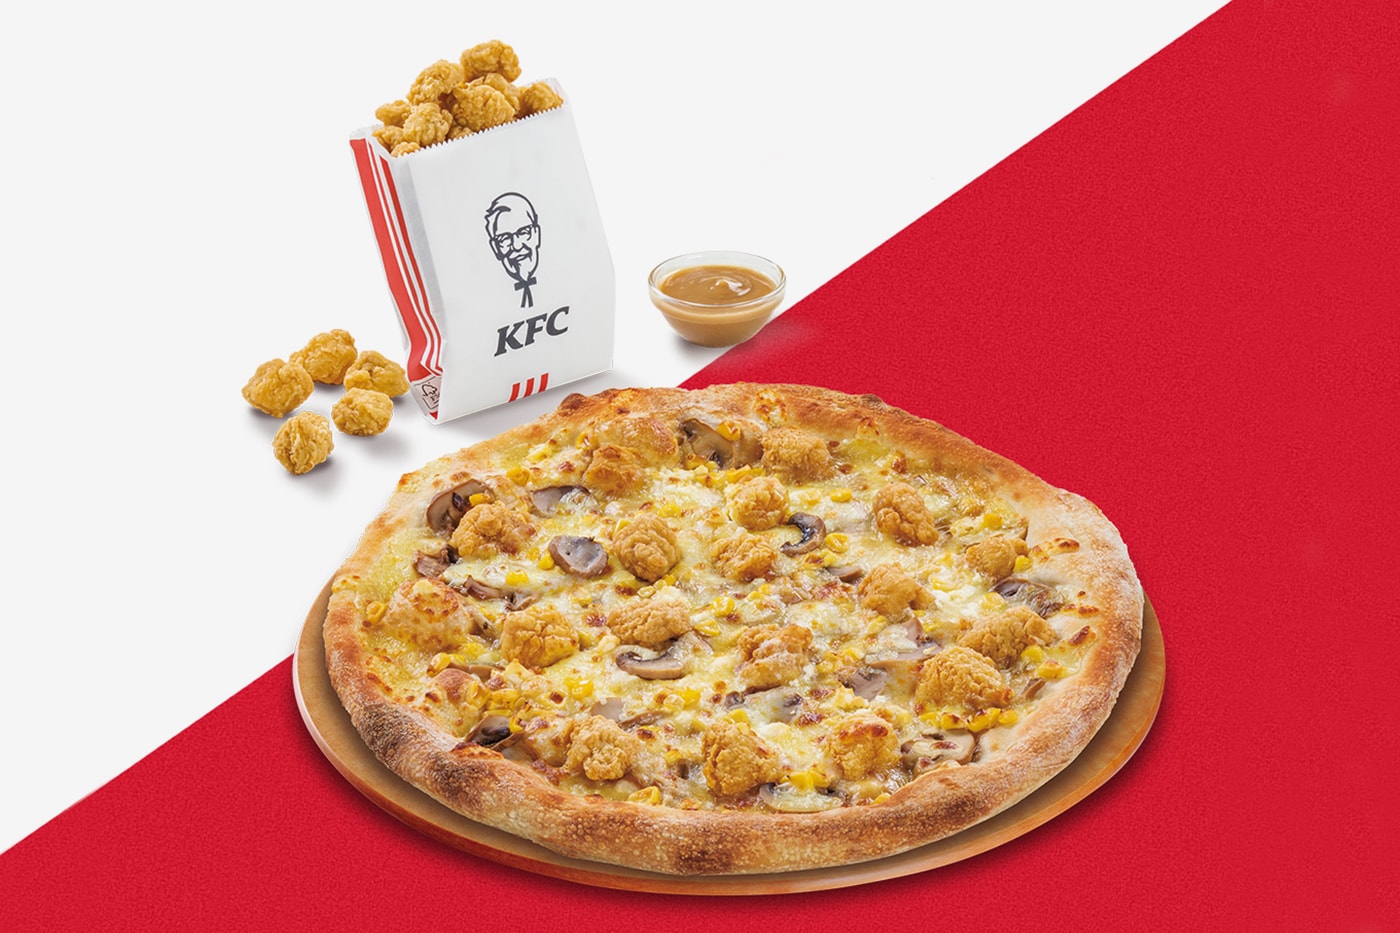 Pizza Hut KFC Popcorn Chicken Pizza fast food limited edition gravy cheese mushrooms sweetcorn mobile game Pizzatainer Colonel Sanders